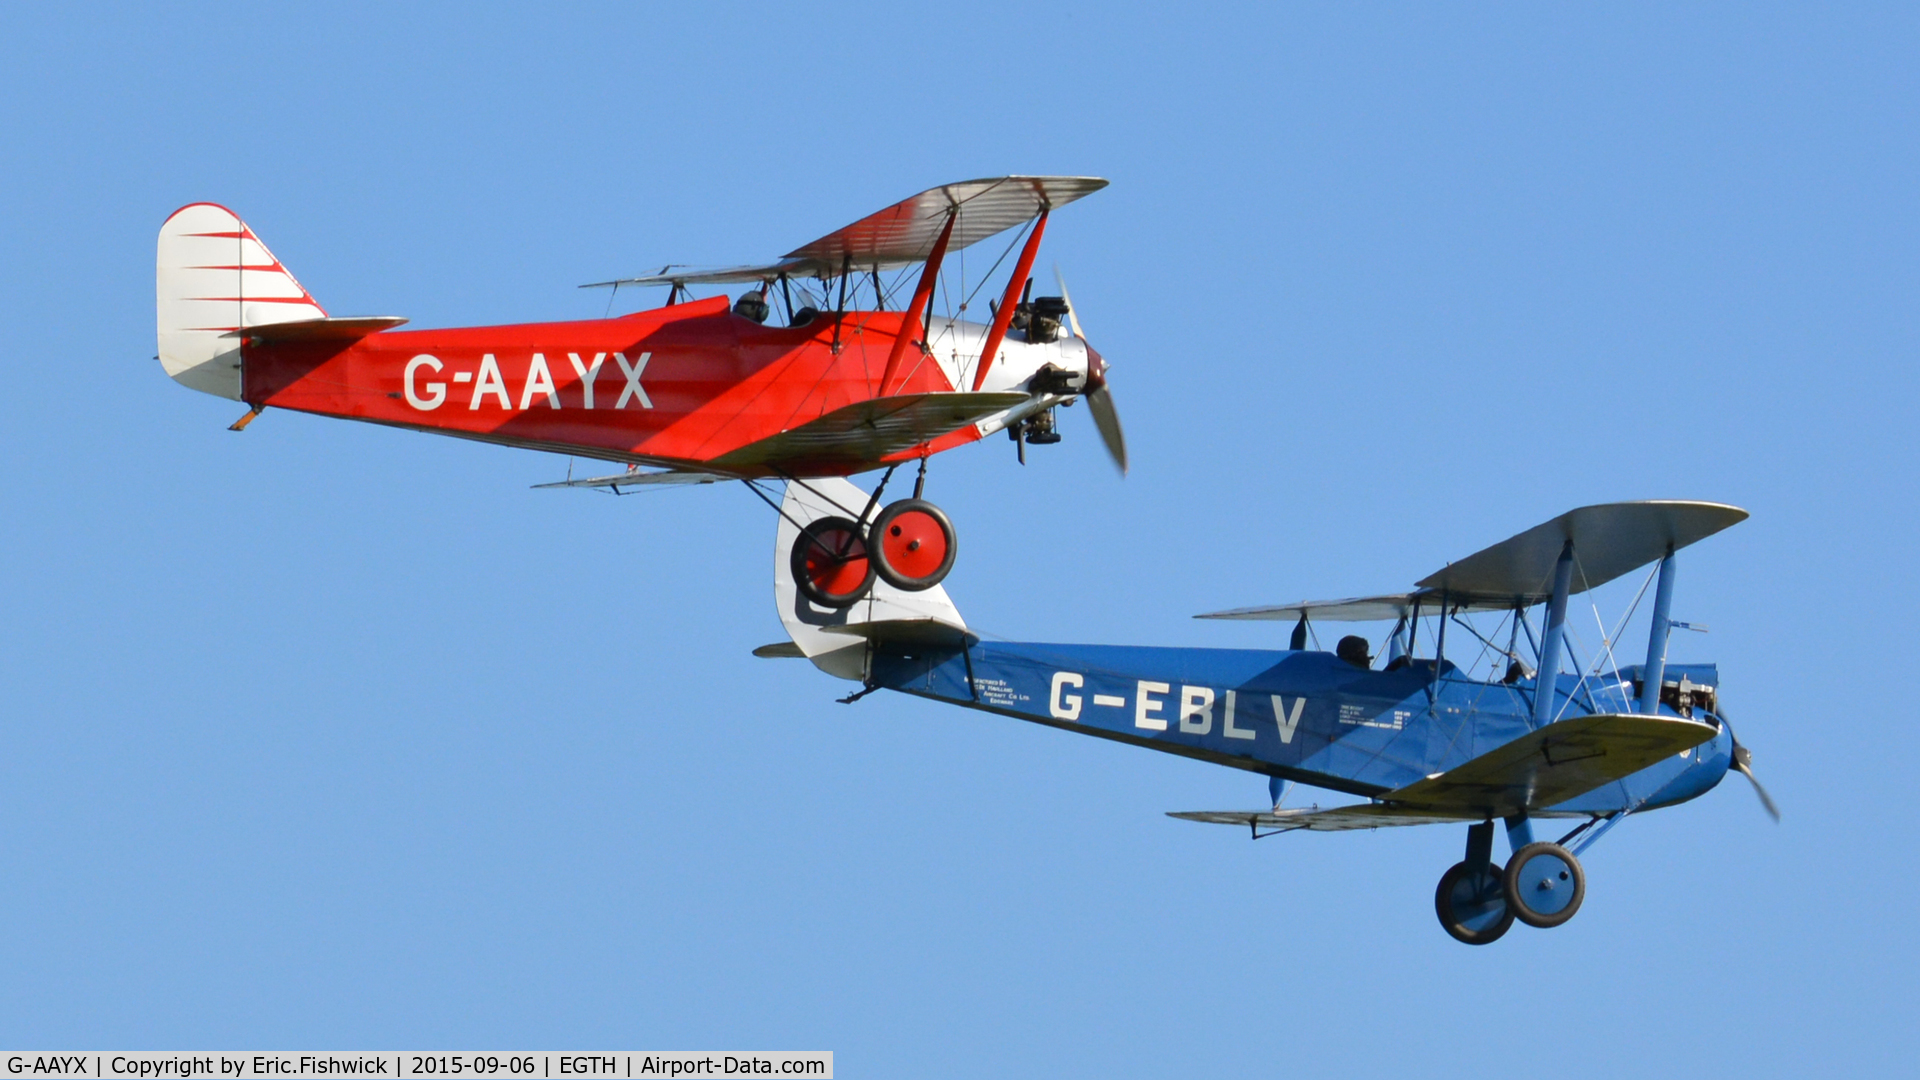 G-AAYX, 1930 Southern Martlet C/N 202, 45. G-AAYX Martlet and Moth in display mode at The Shuttleworth Pagent Airshow, Sep. 2015.